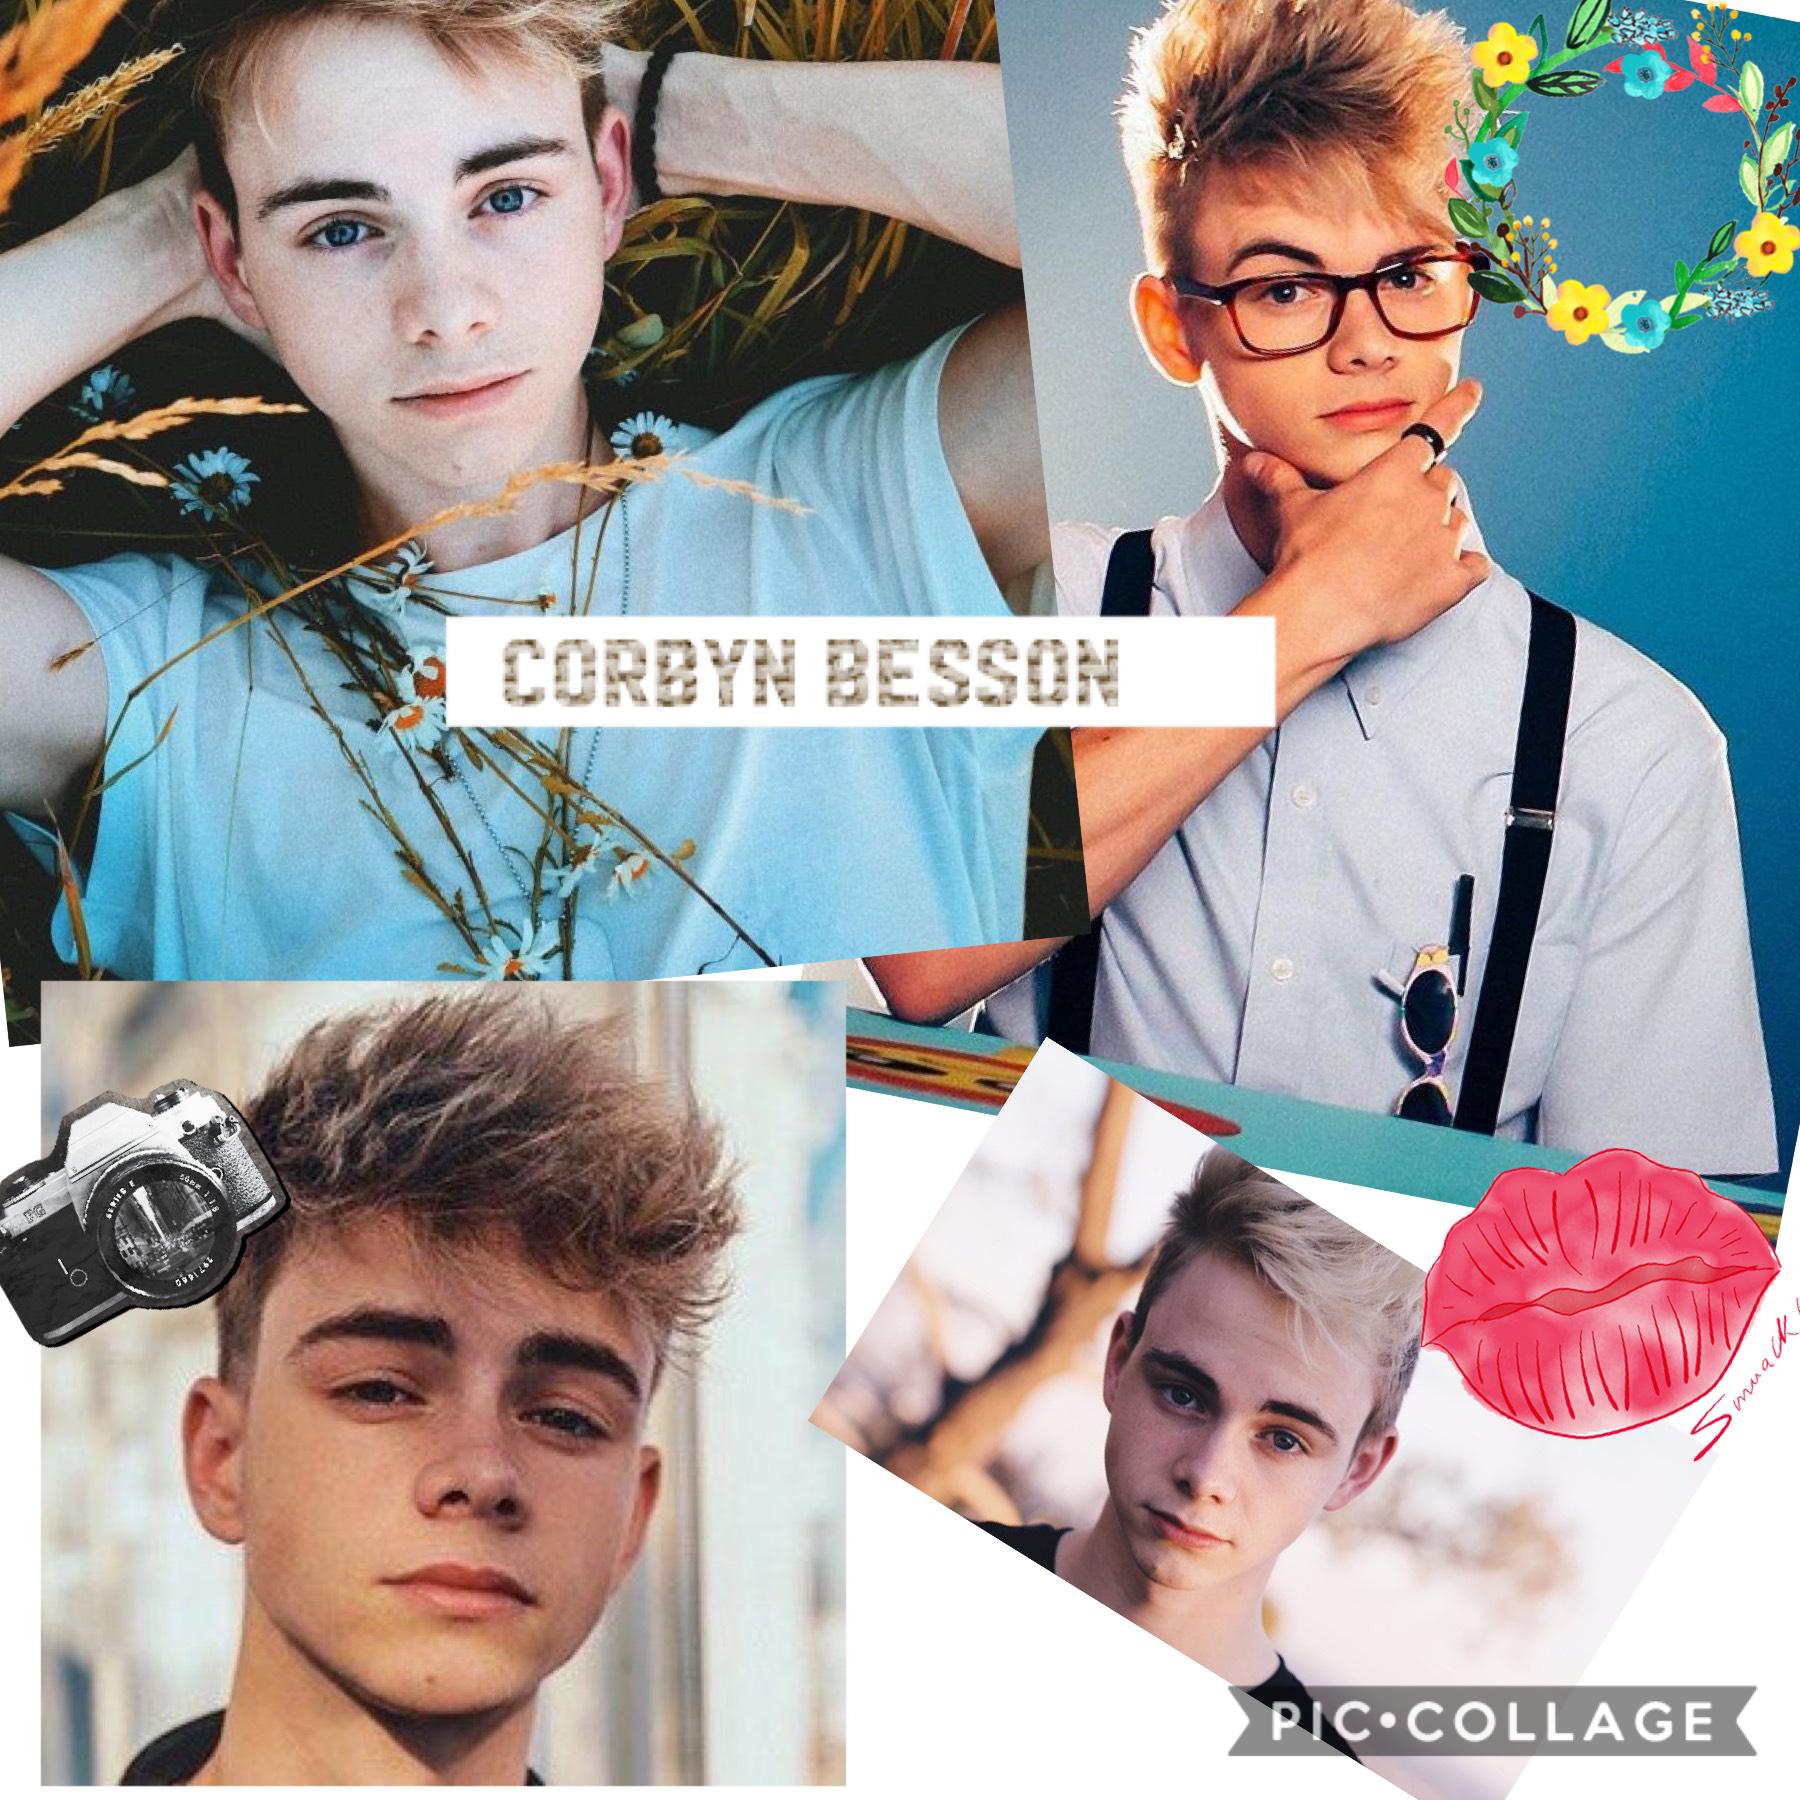 And here’s Corbean (Corbyn) Besson 